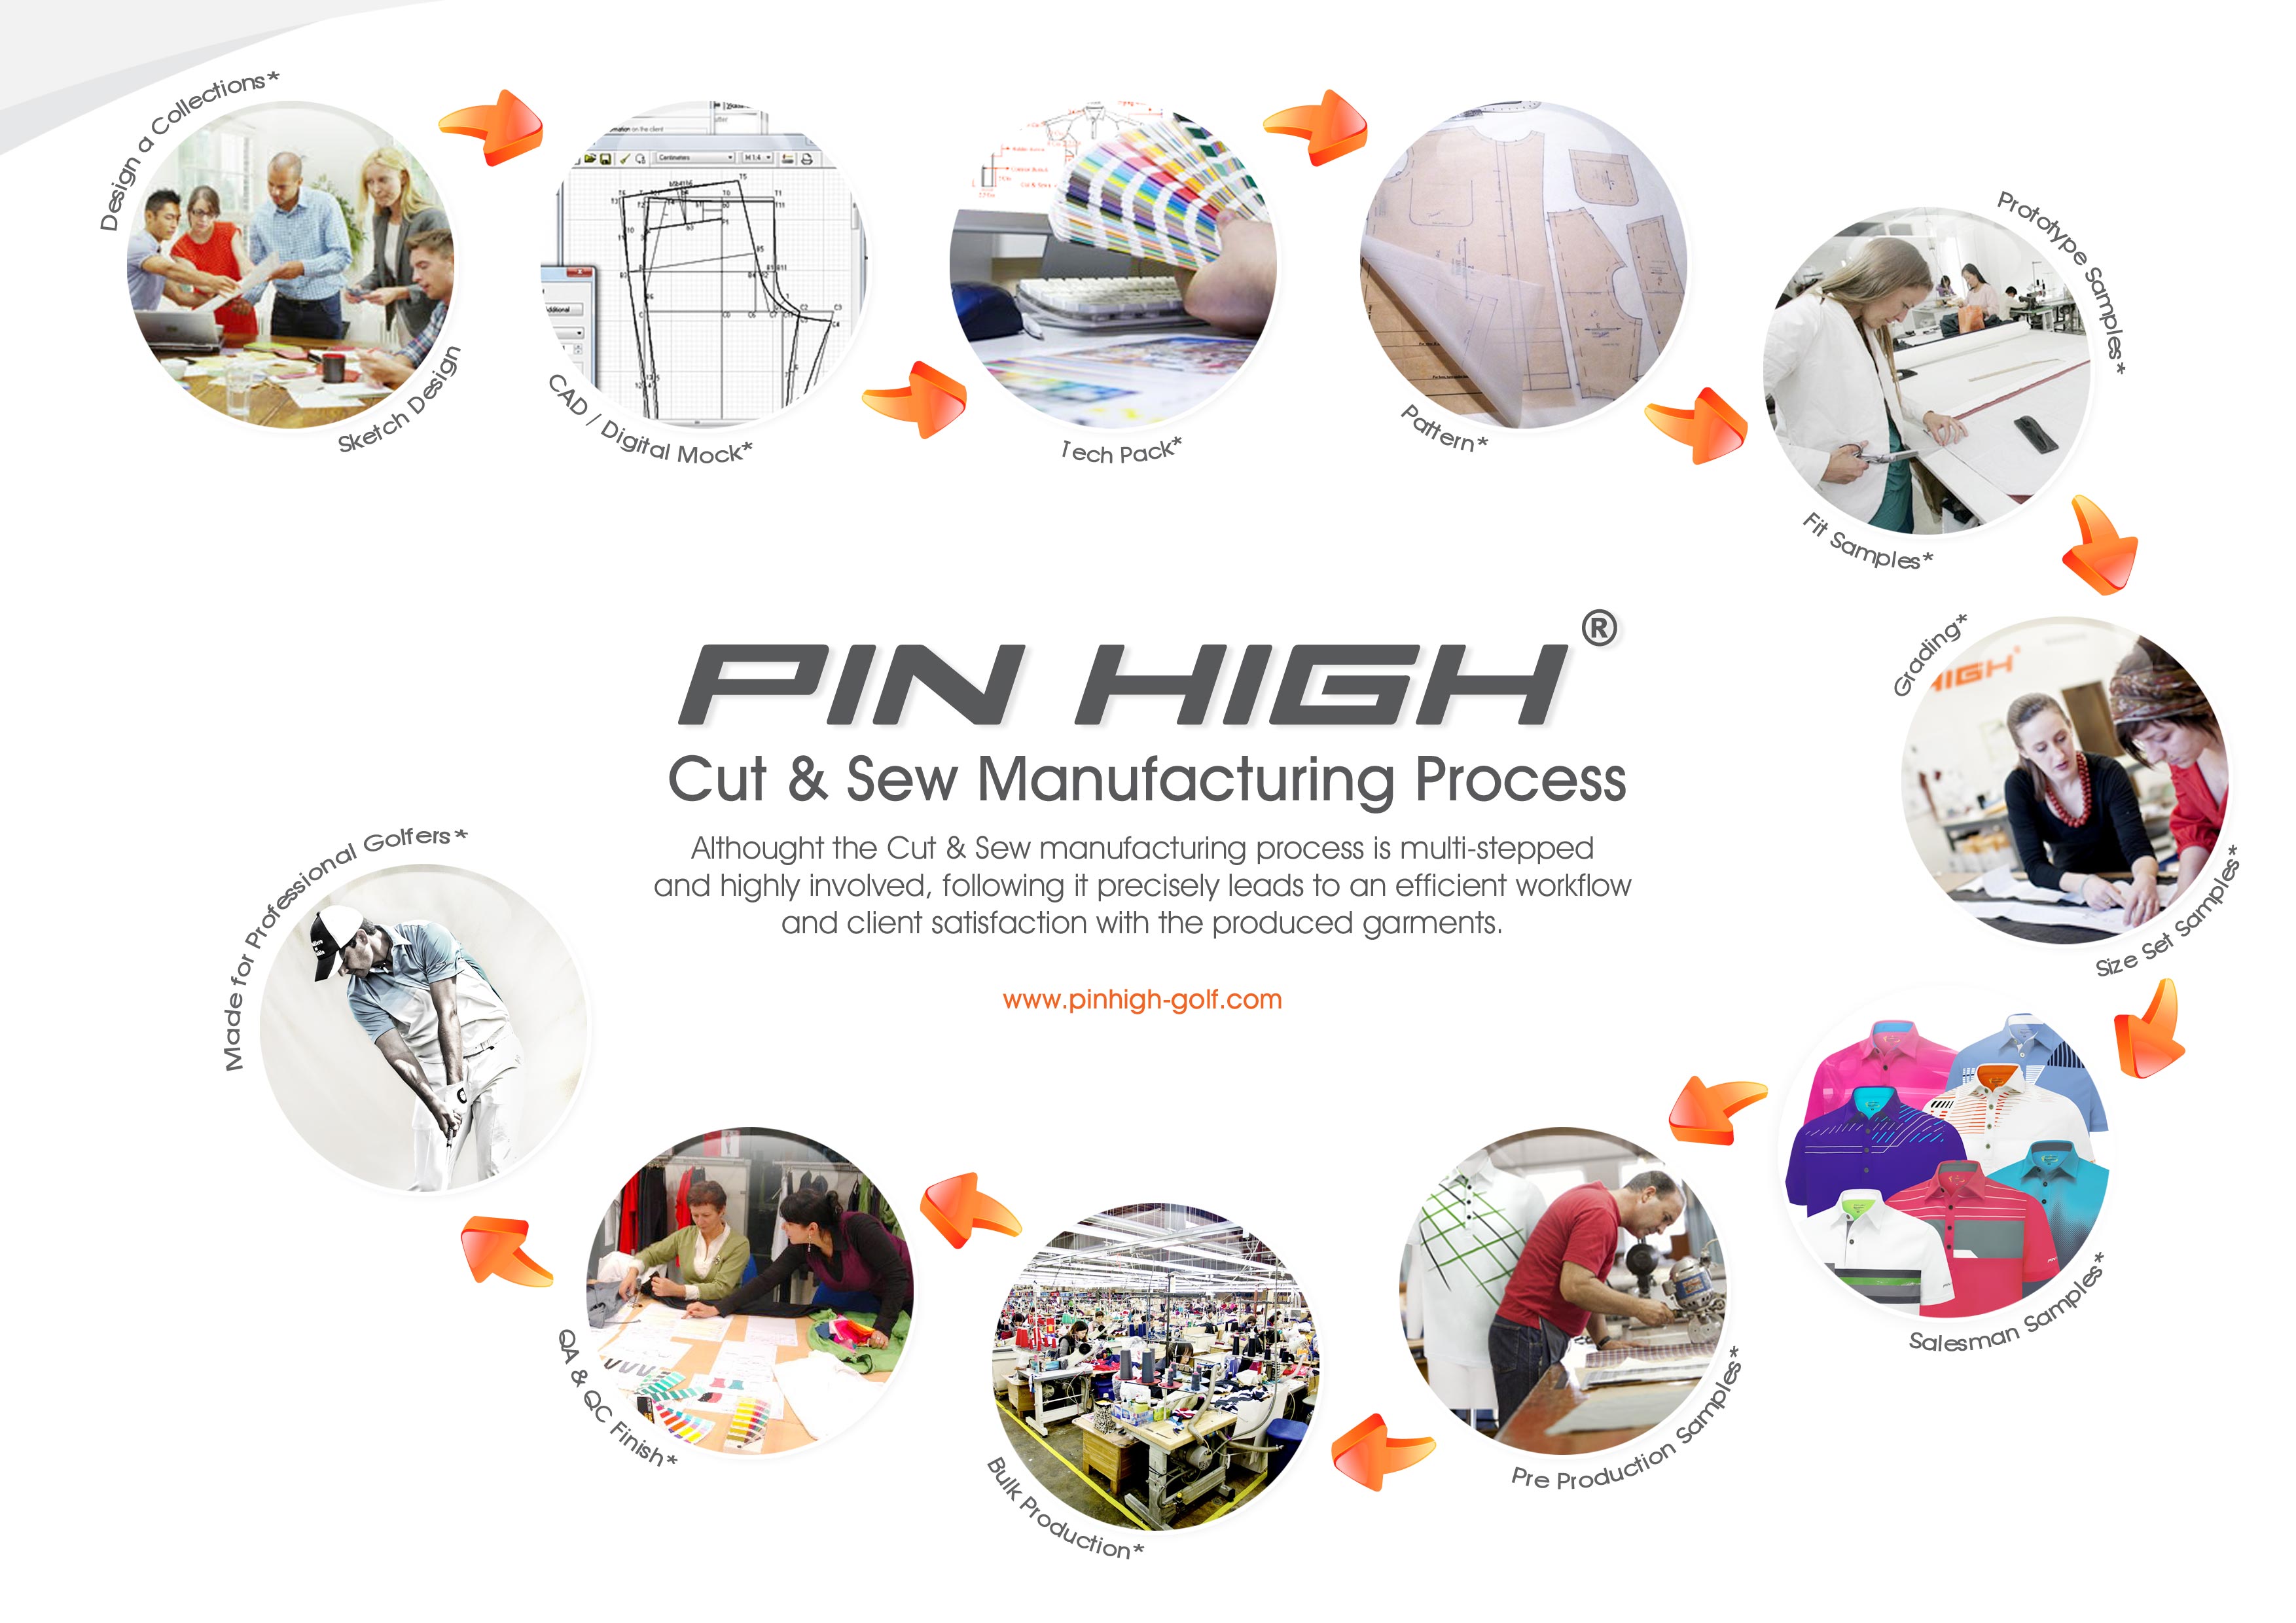 Our Manufacturing Process